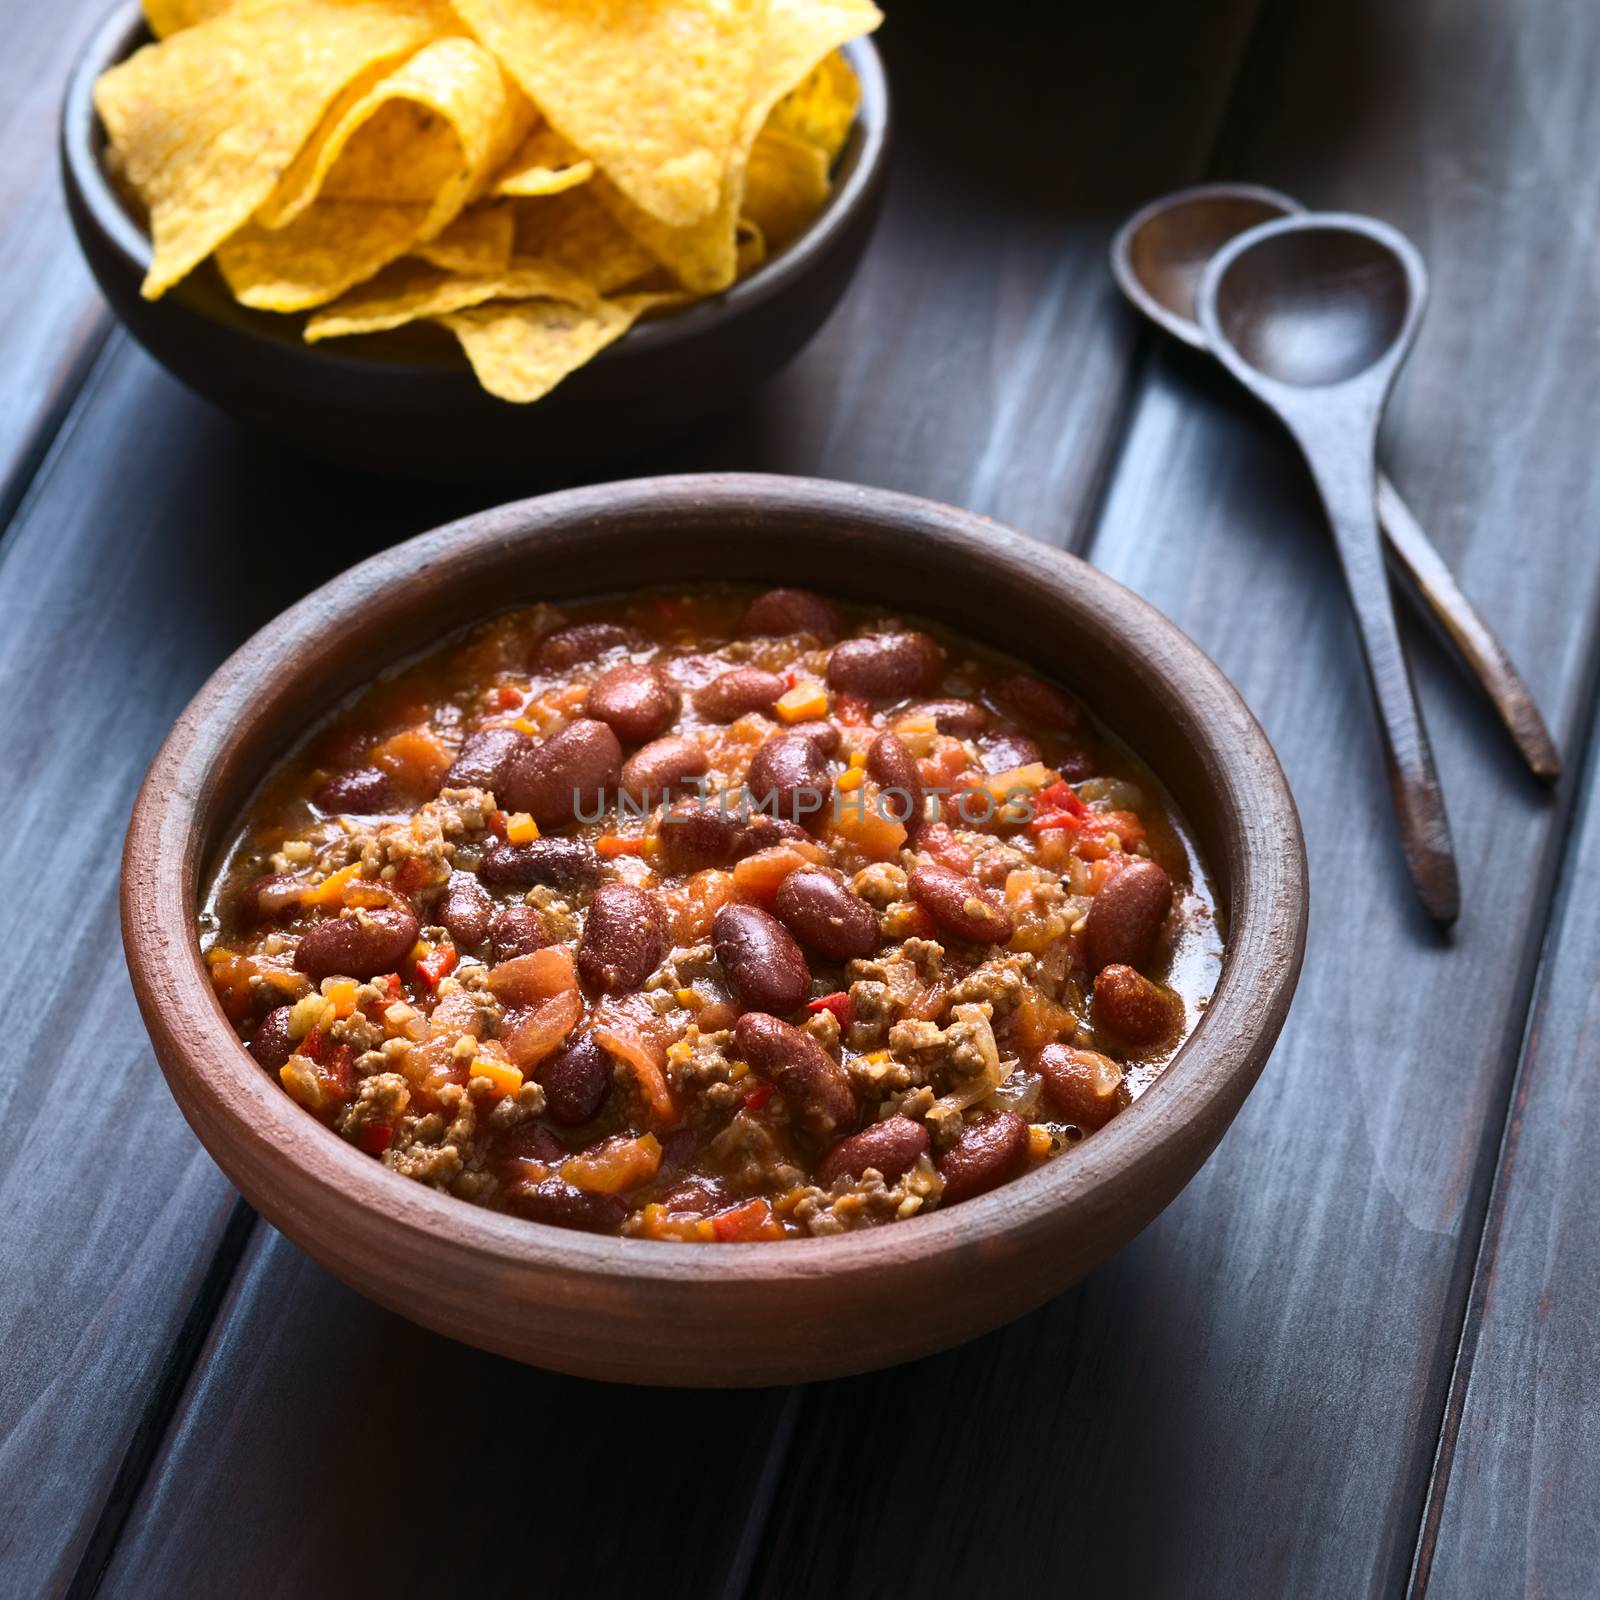 Rustic bowl of chili con carne with tortilla chips in the back, photographed with natural light (Selective Focus, Focus in the middle of the chili)